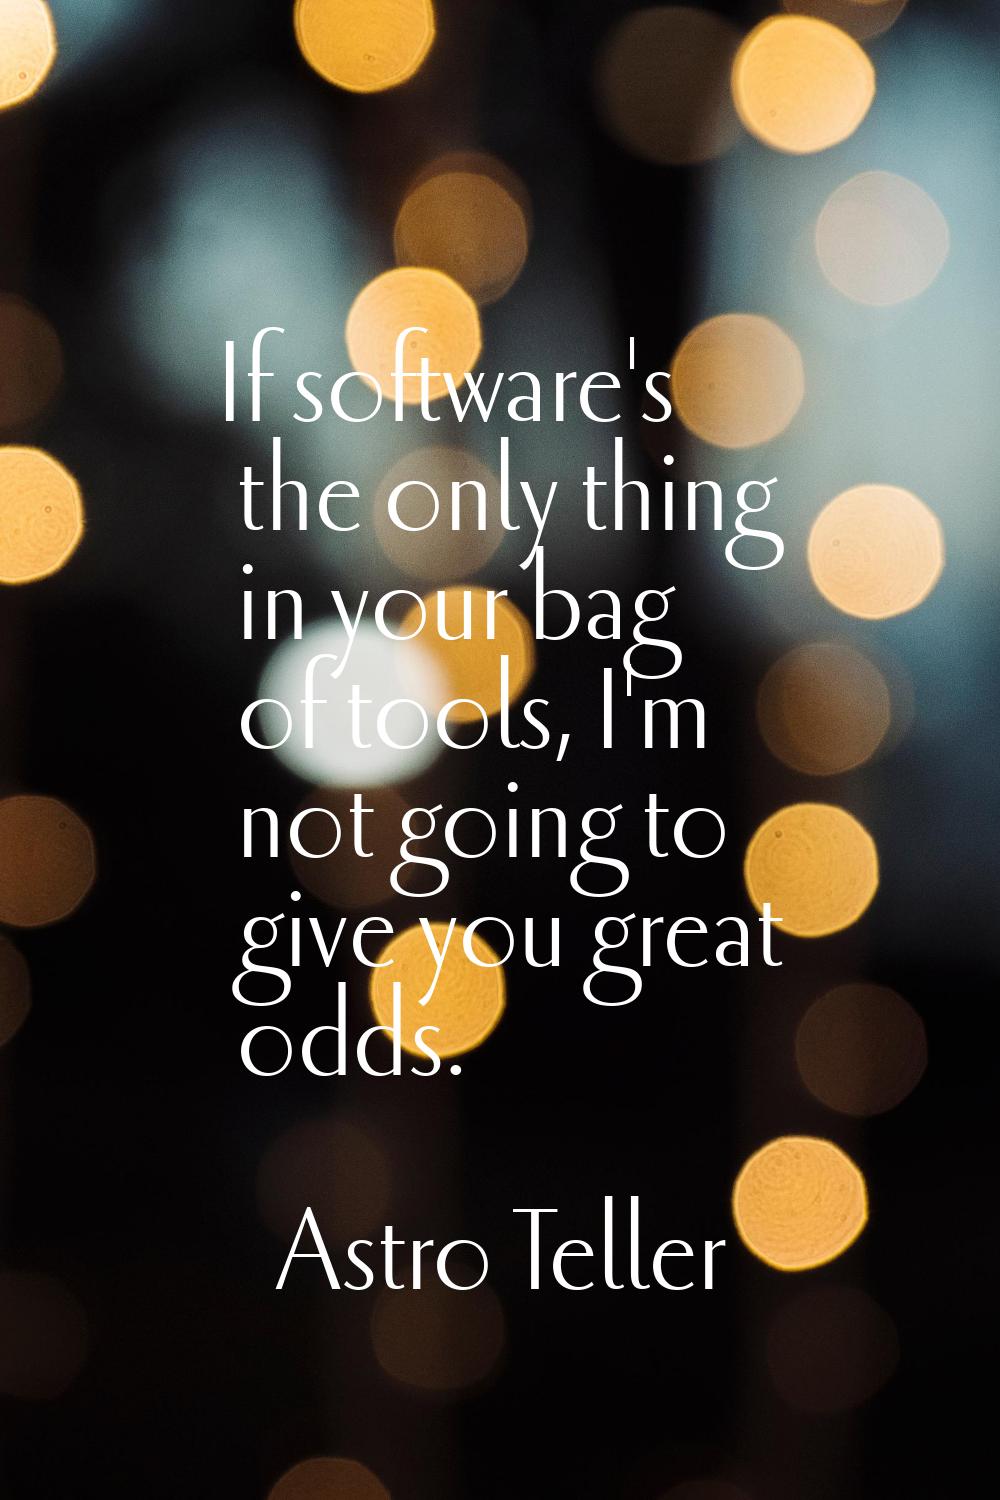 If software's the only thing in your bag of tools, I'm not going to give you great odds.